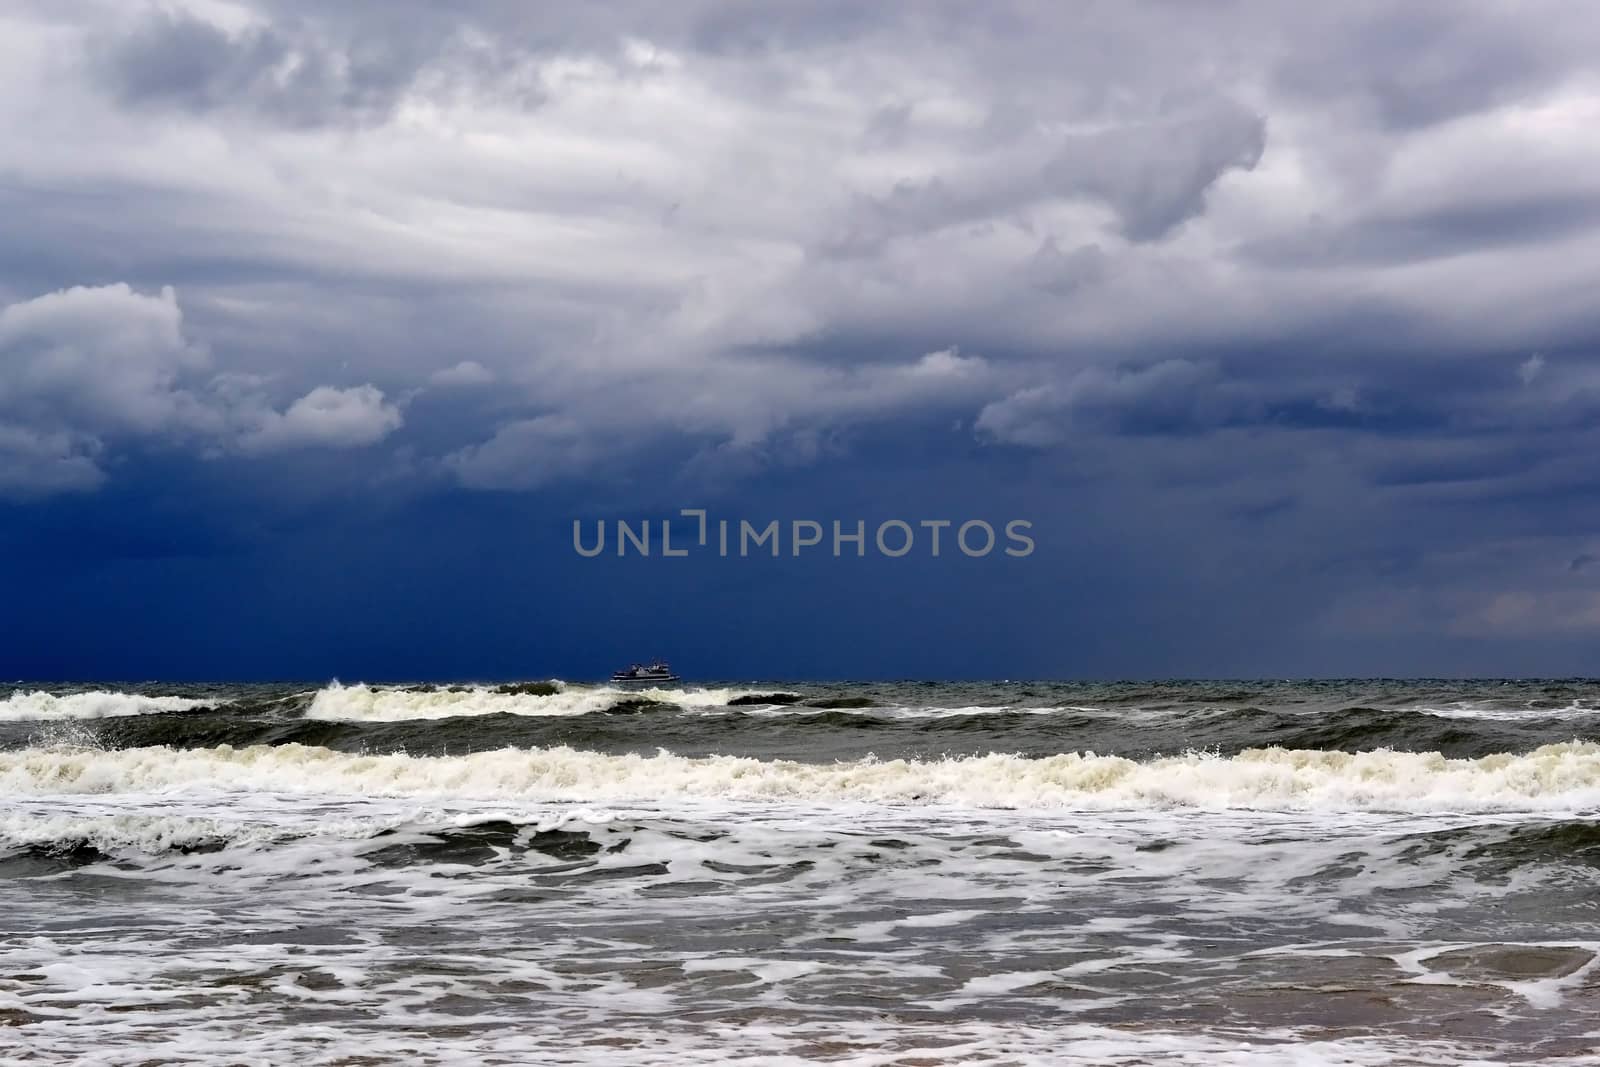 Waves of the Black Sea in rainy weather